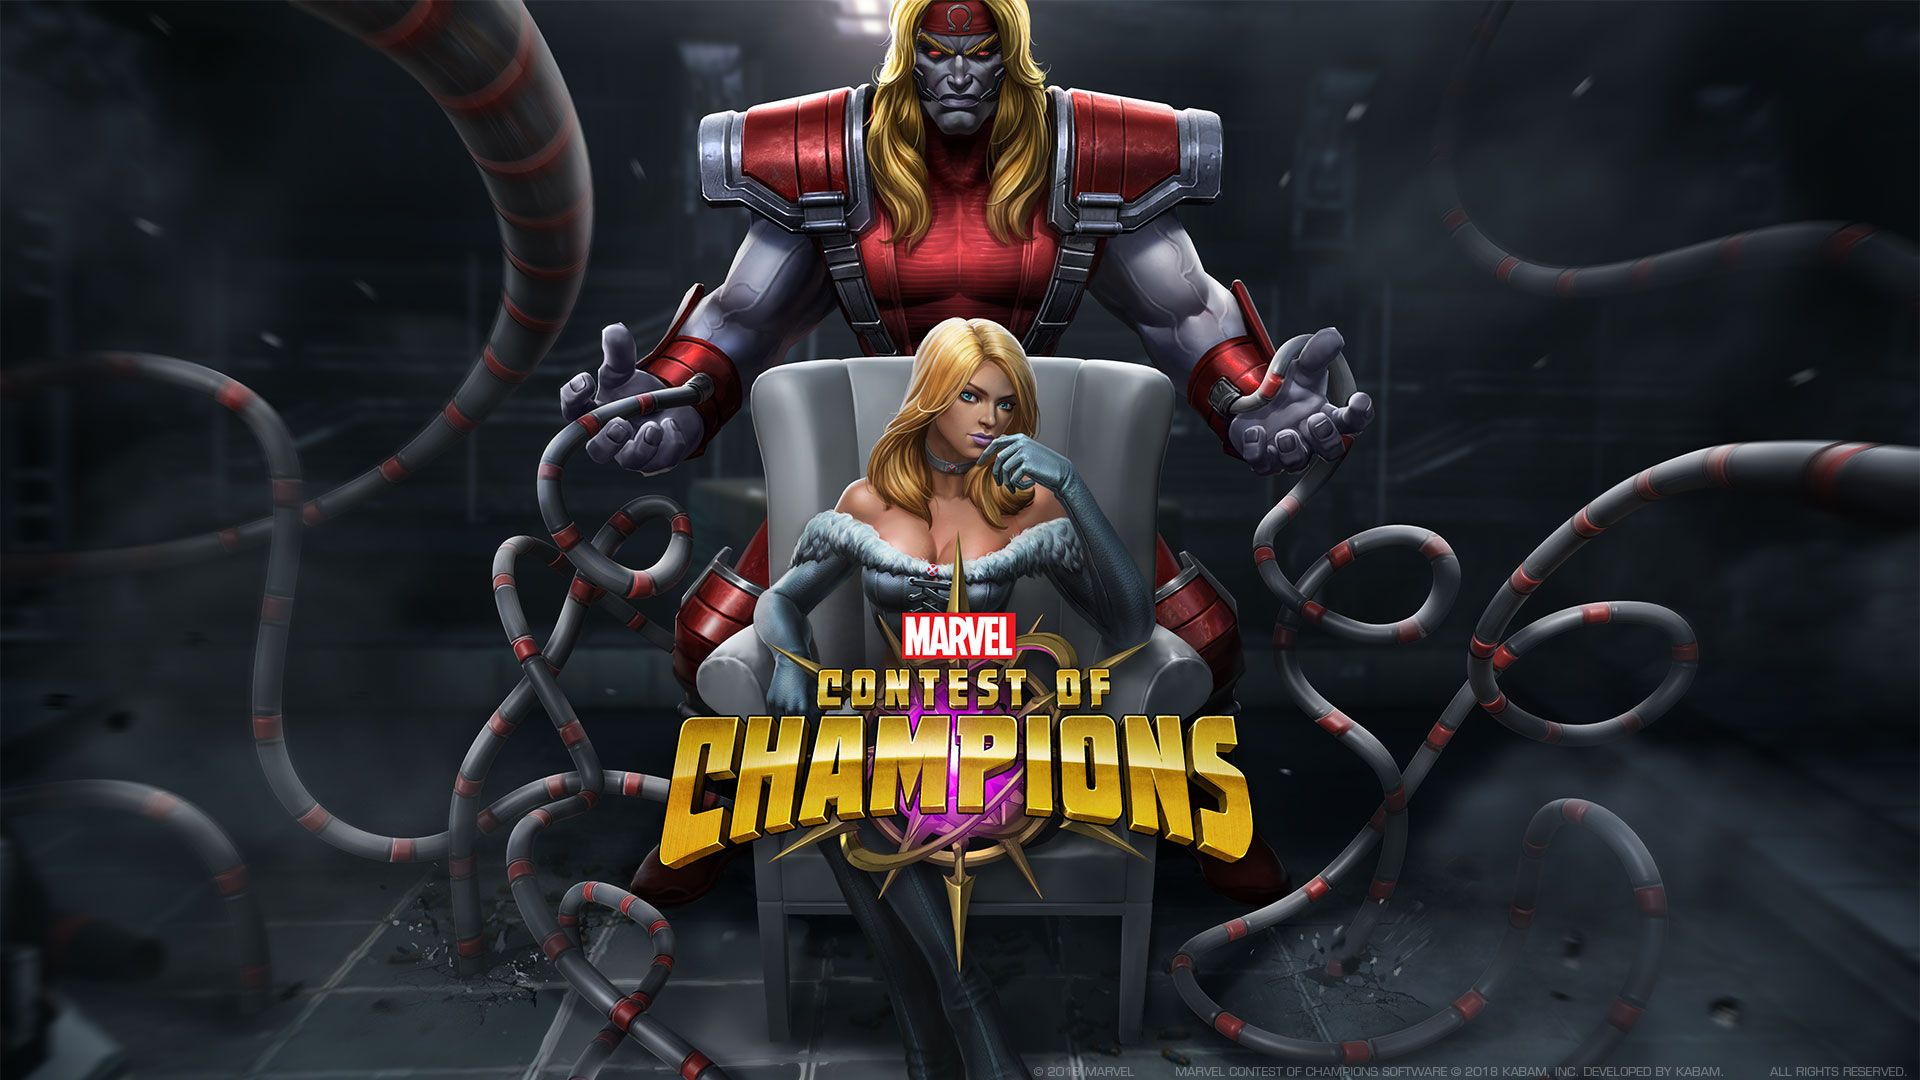 NAME CHANGE TOKENS ENTERING THE CONTEST SOON!. Marvel Contest of Champions